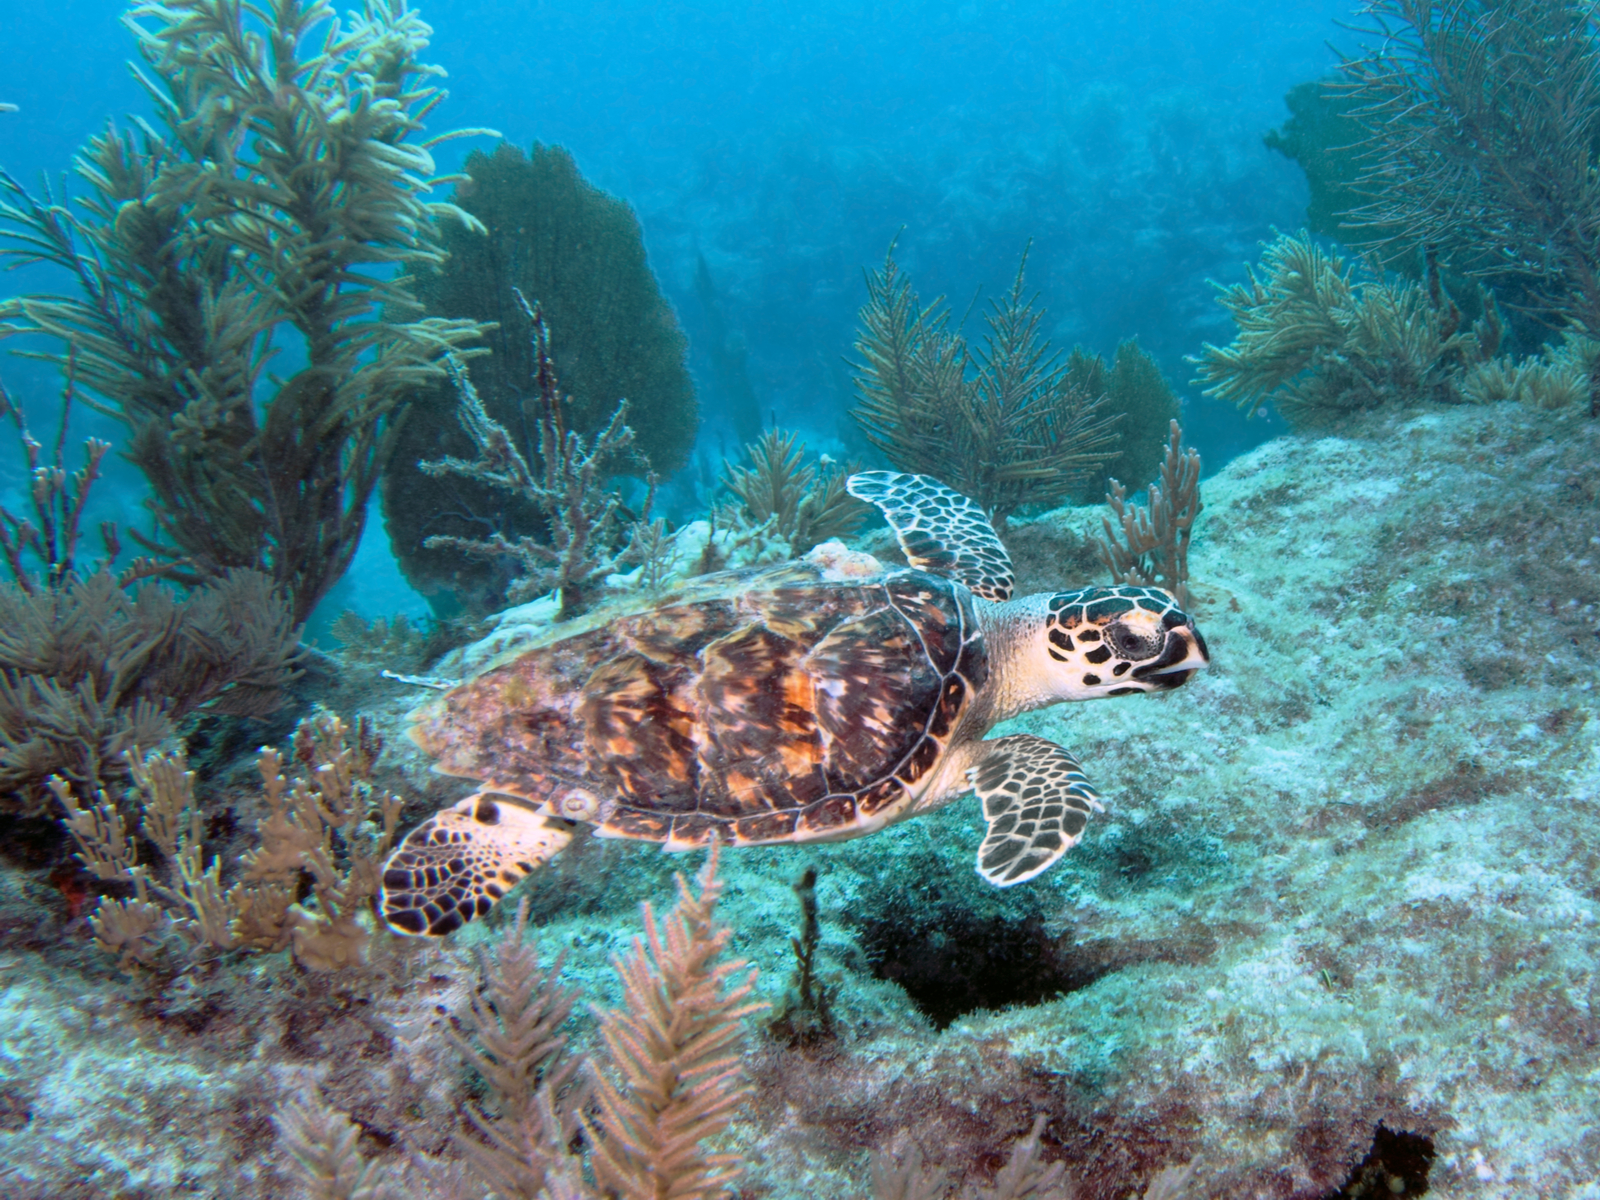 During the best time to go to Florida Keys, a Hawksbill sea turtle swims along a coral reef